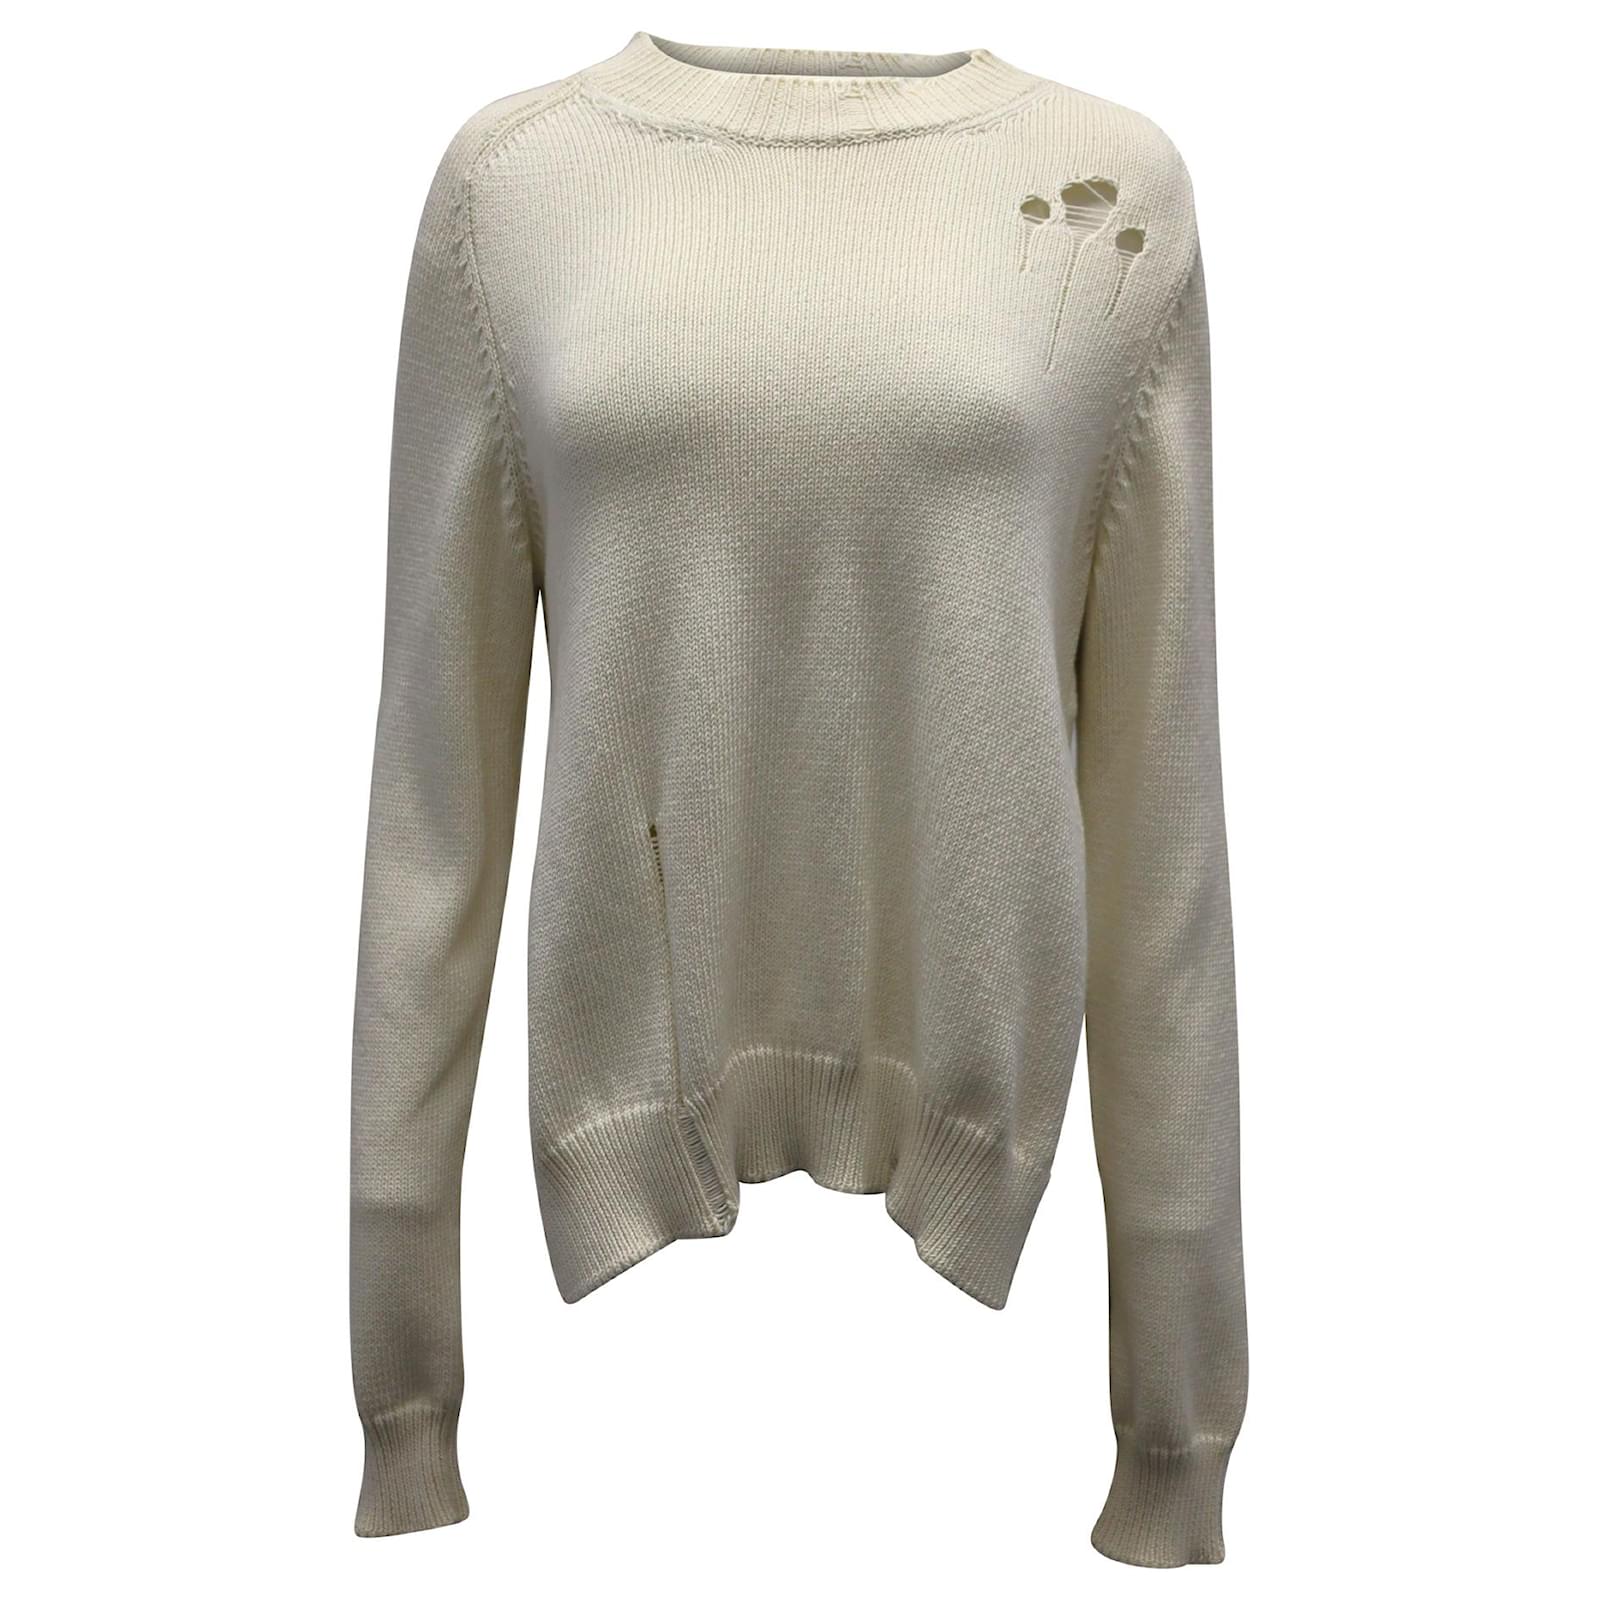 Maison Margiela Distressed Knitted Sweater in Cream Cotton